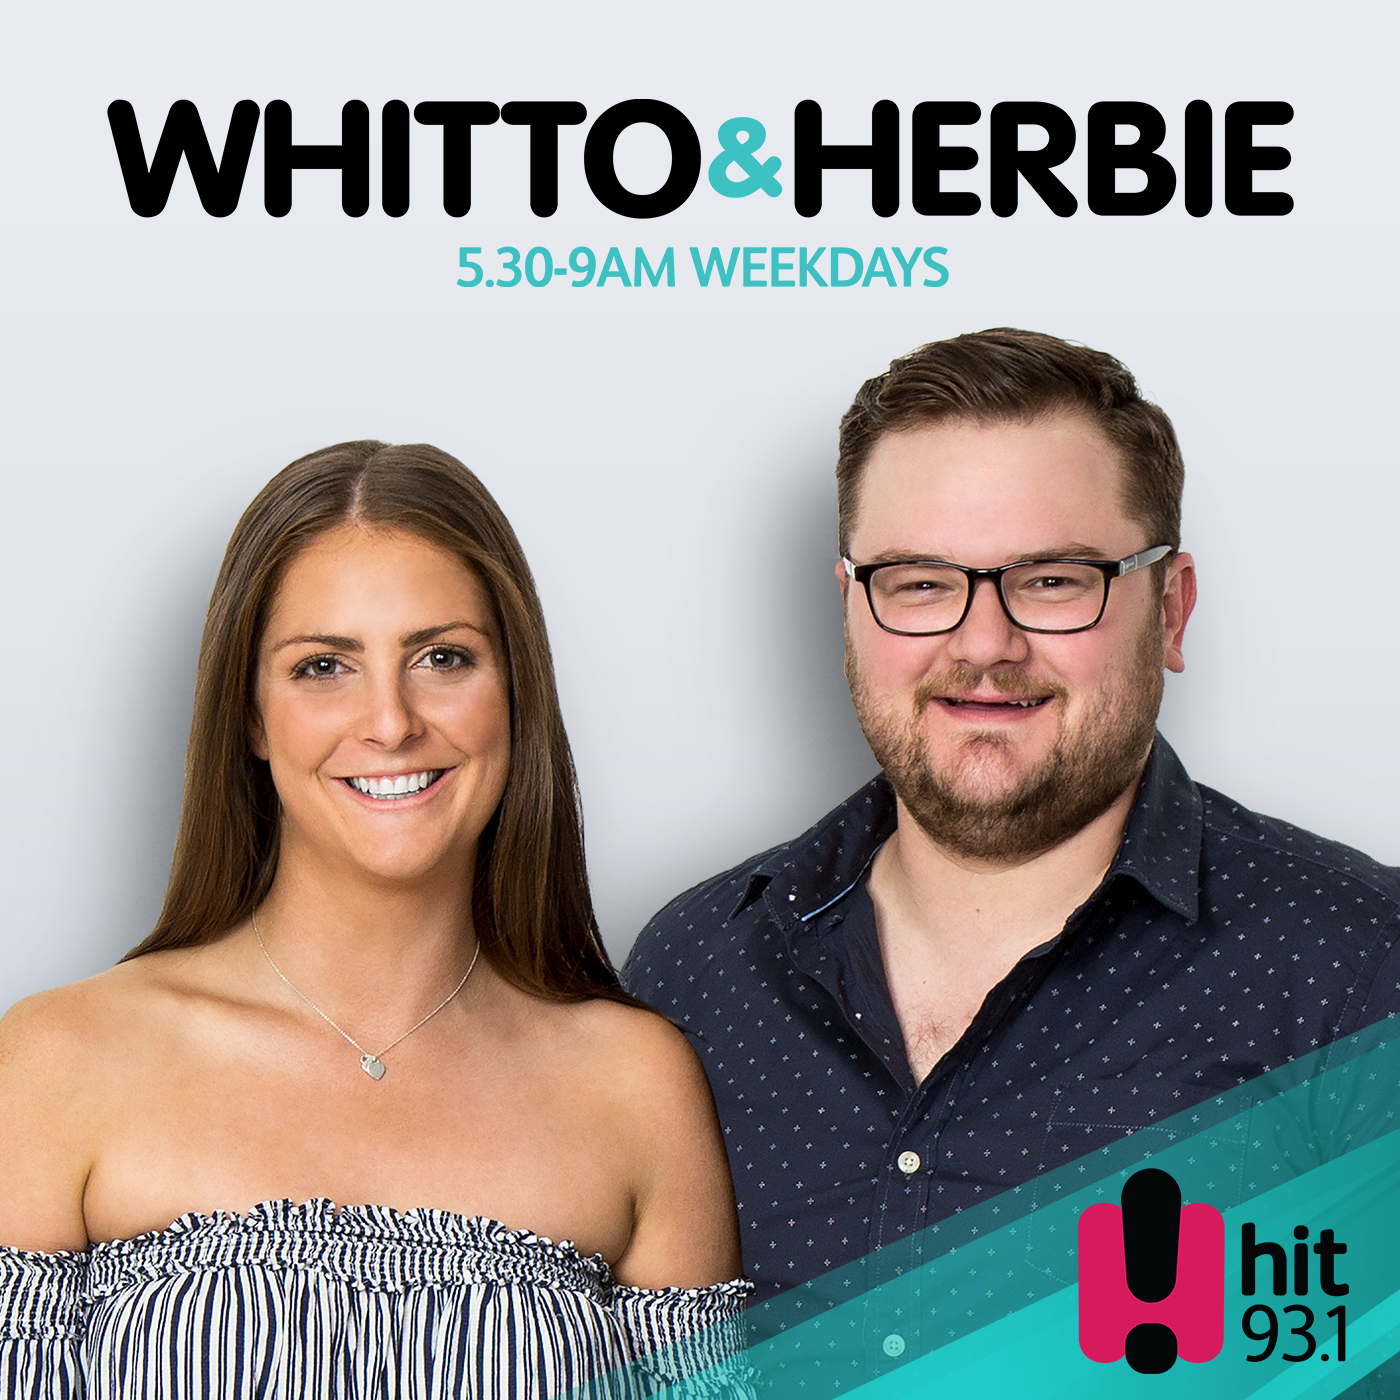 Whitto and Herbie - hit93.1 Riverina